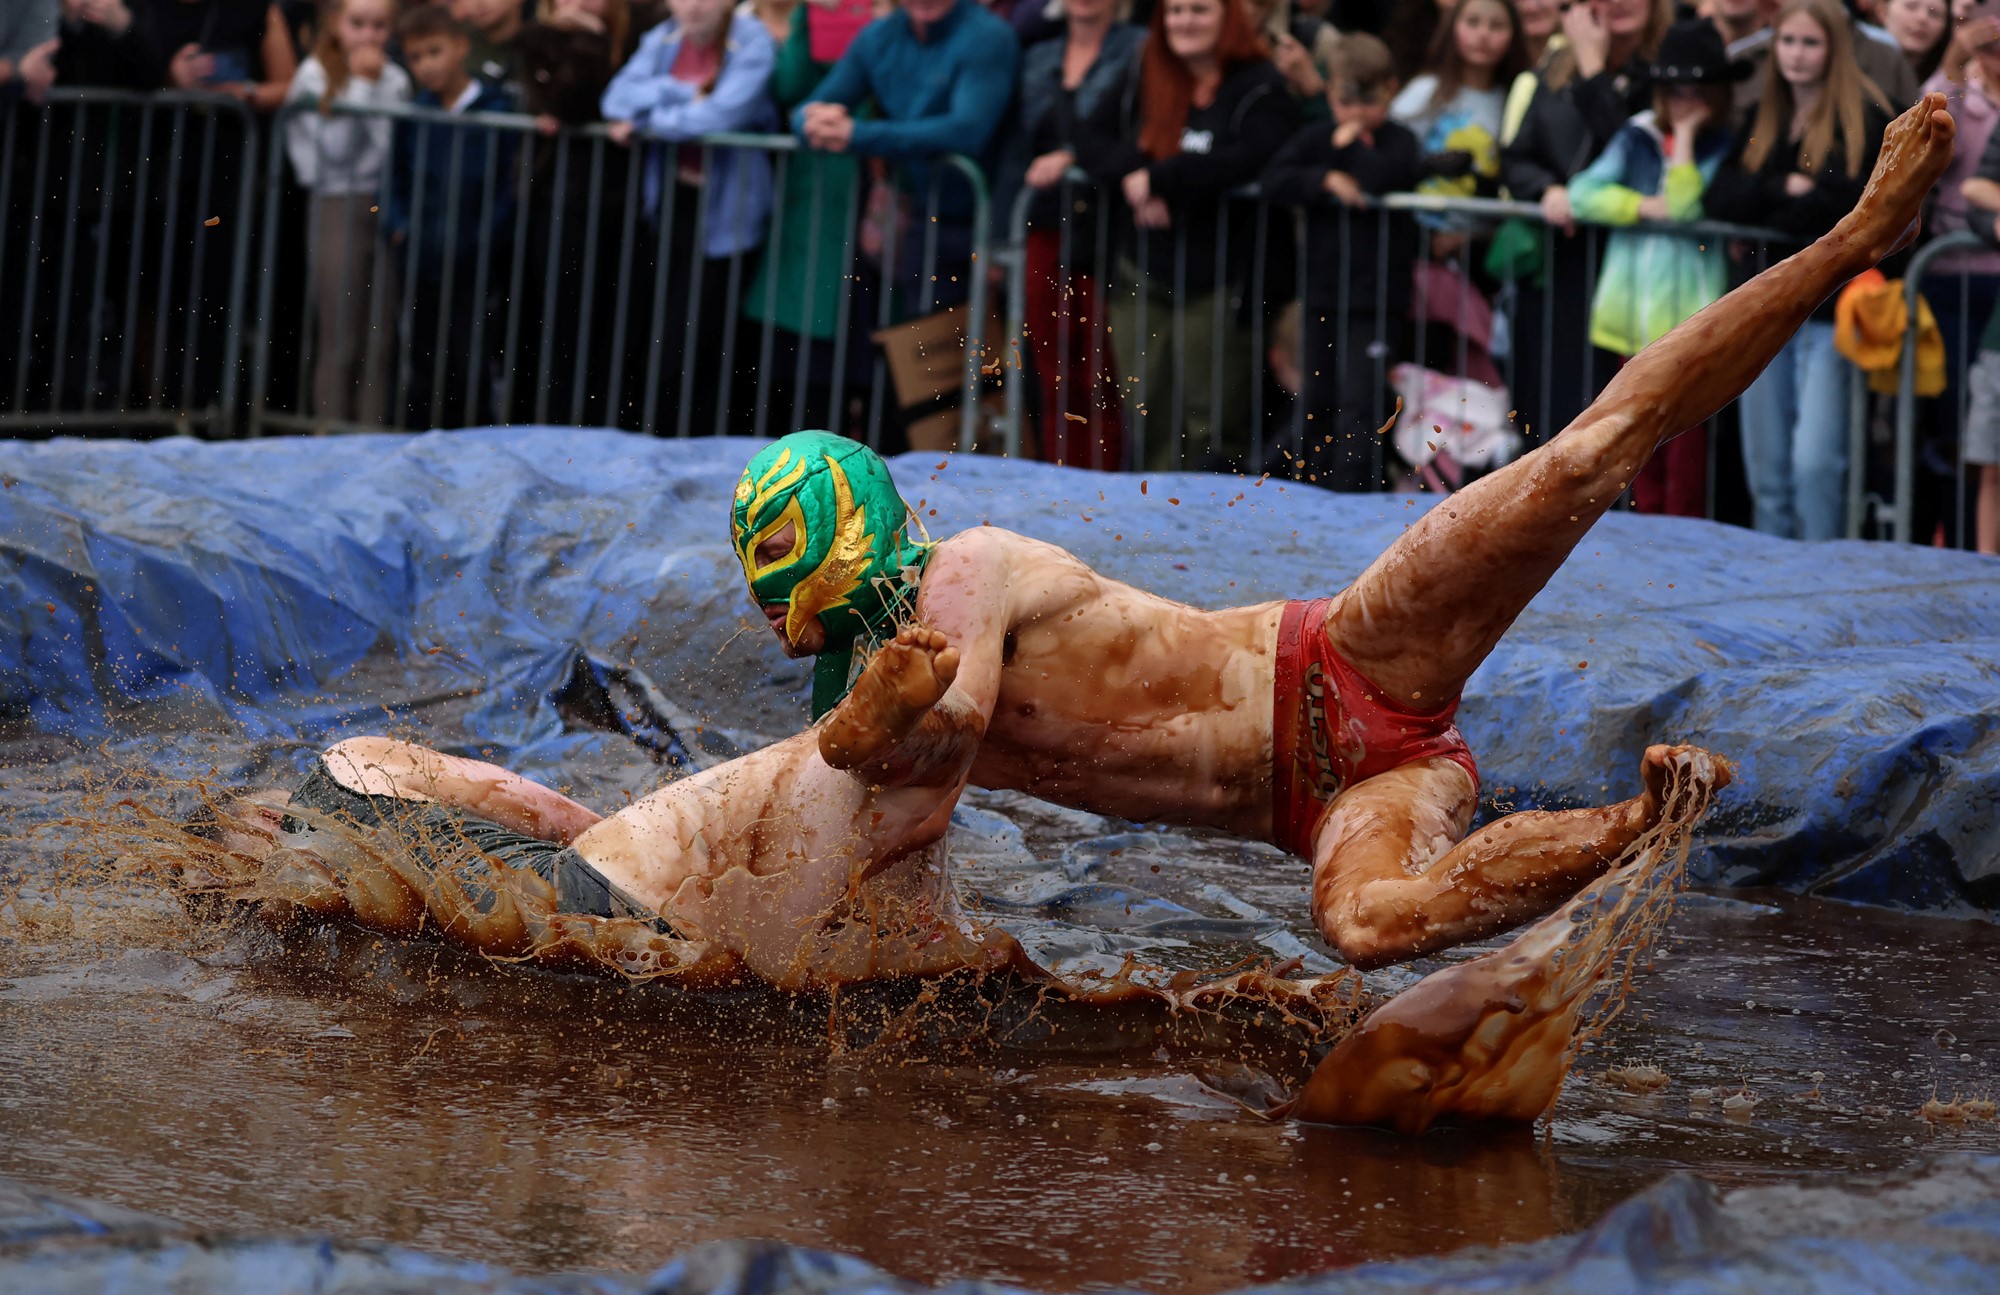 A man in a wrestling mask tackles another into a pool of gravy 